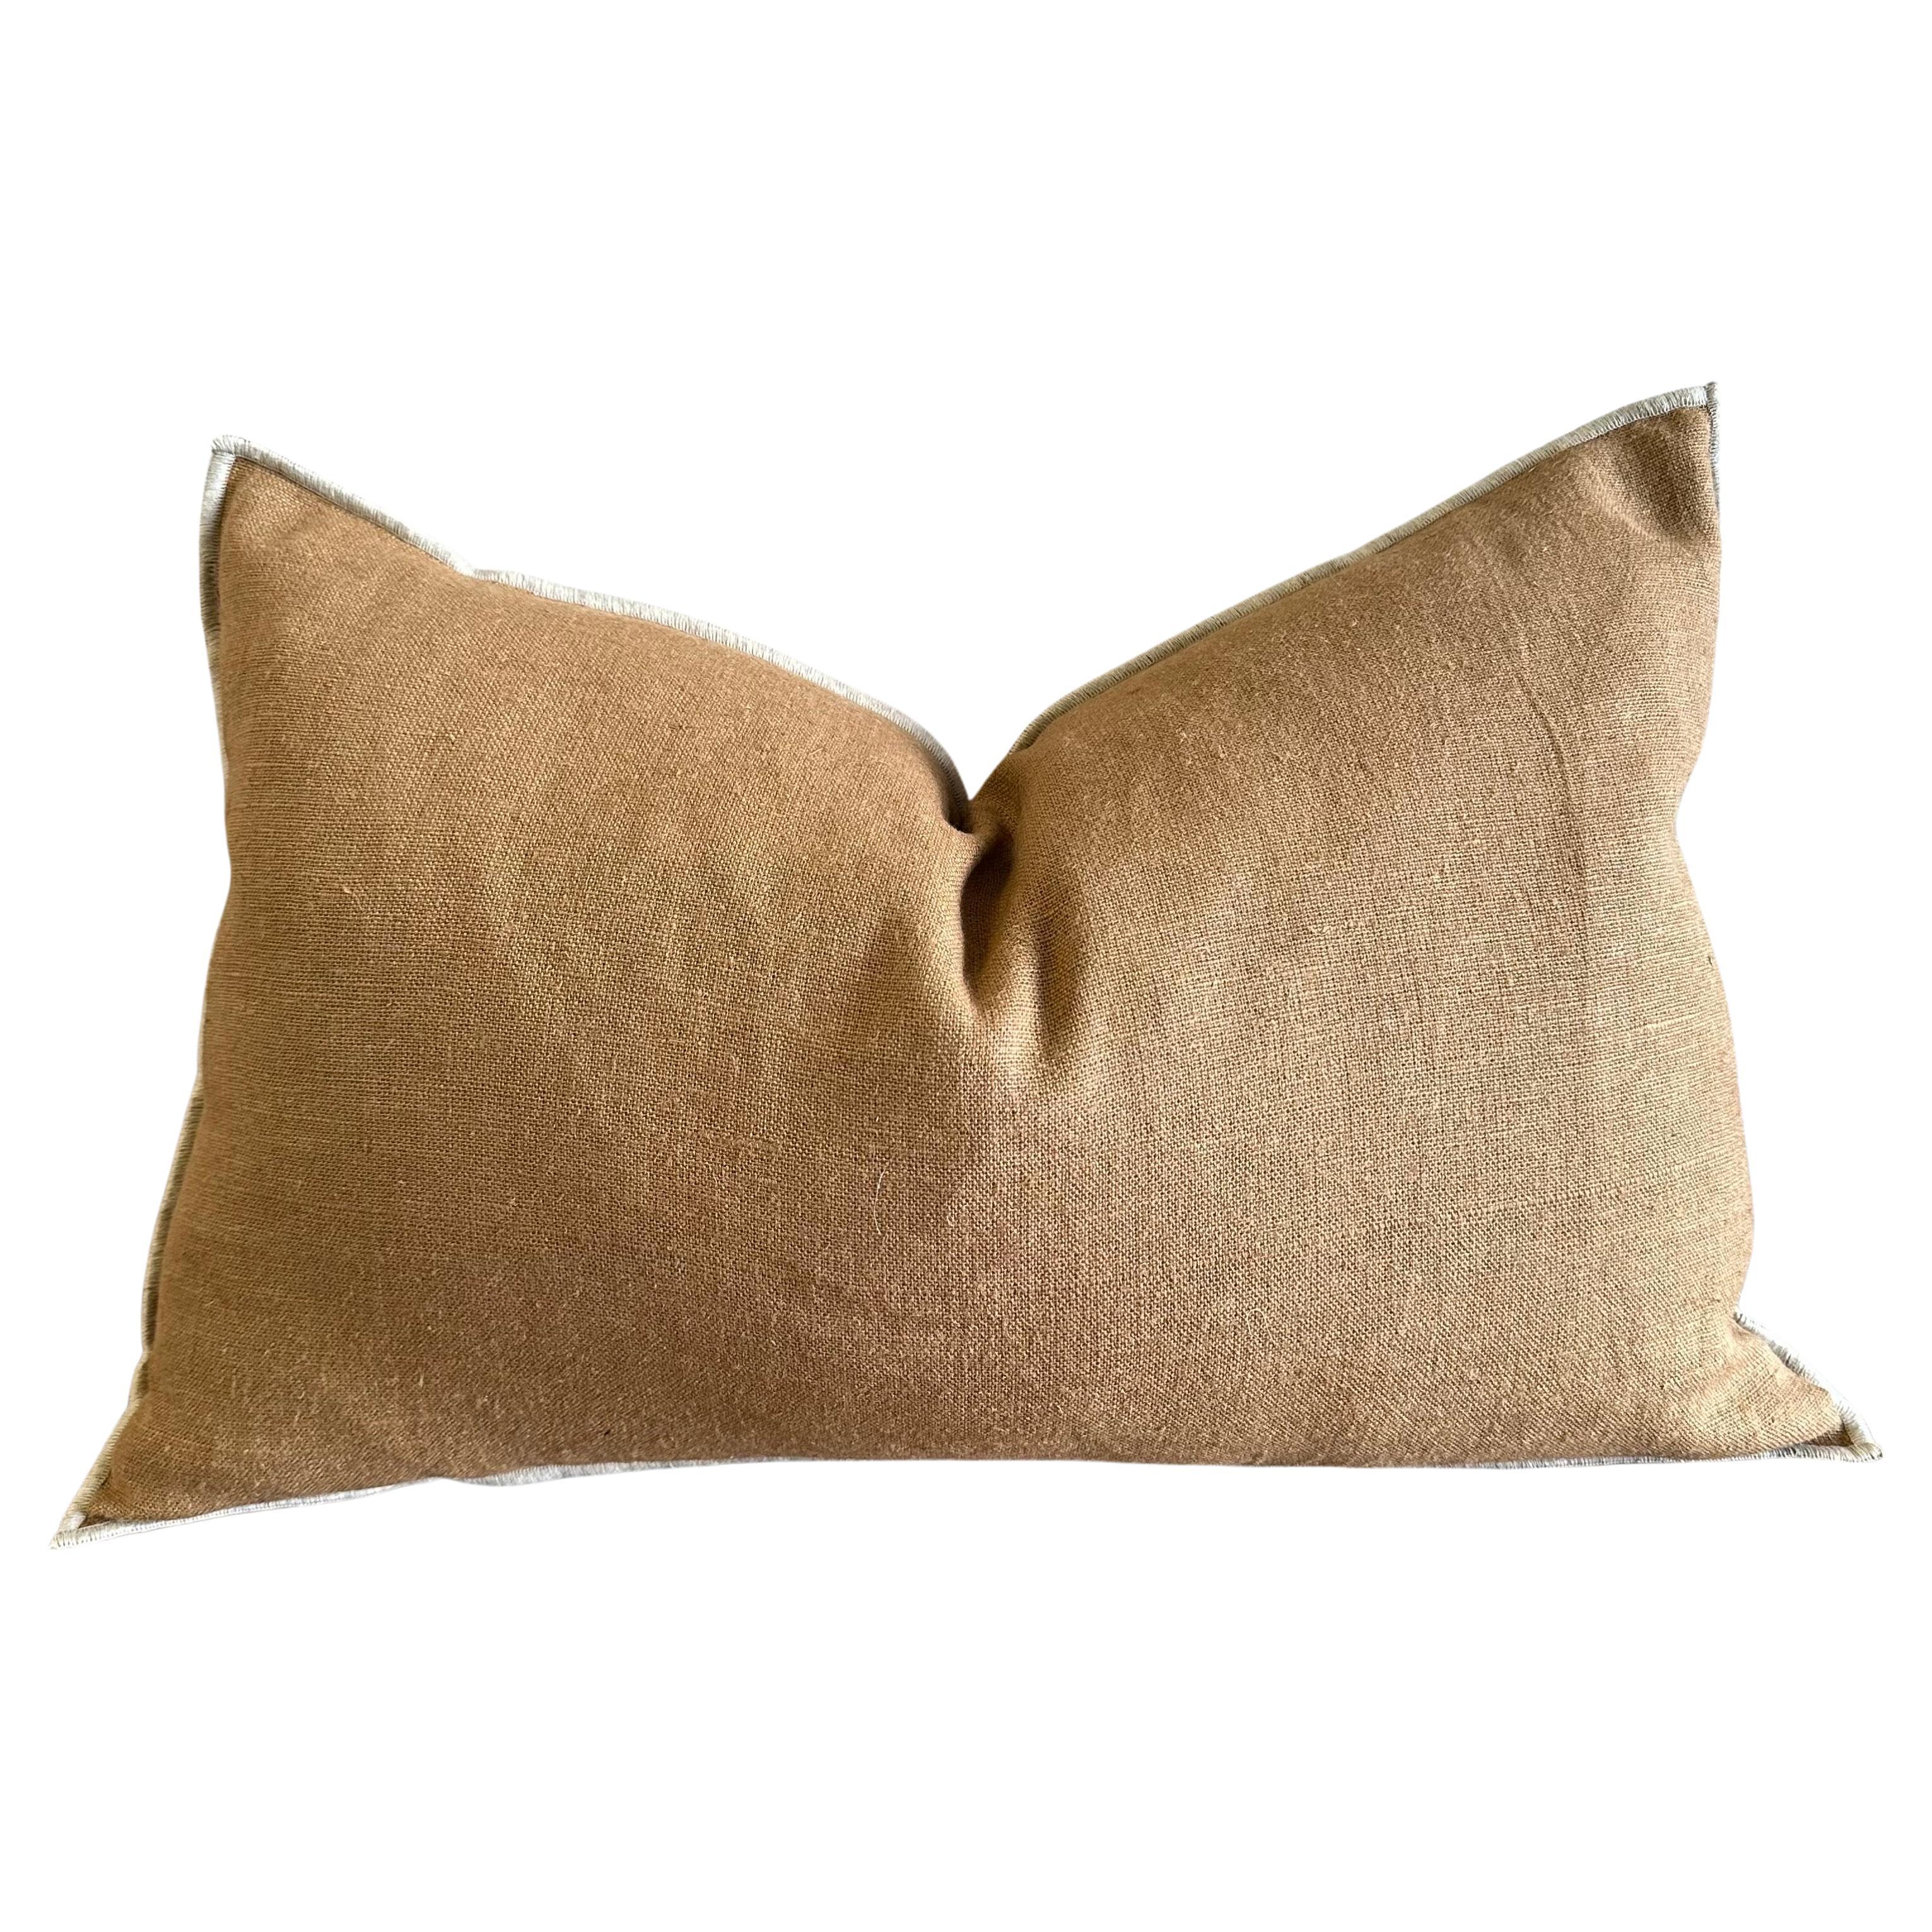 French Flax Linen Lumbar Pillow in Tabac For Sale